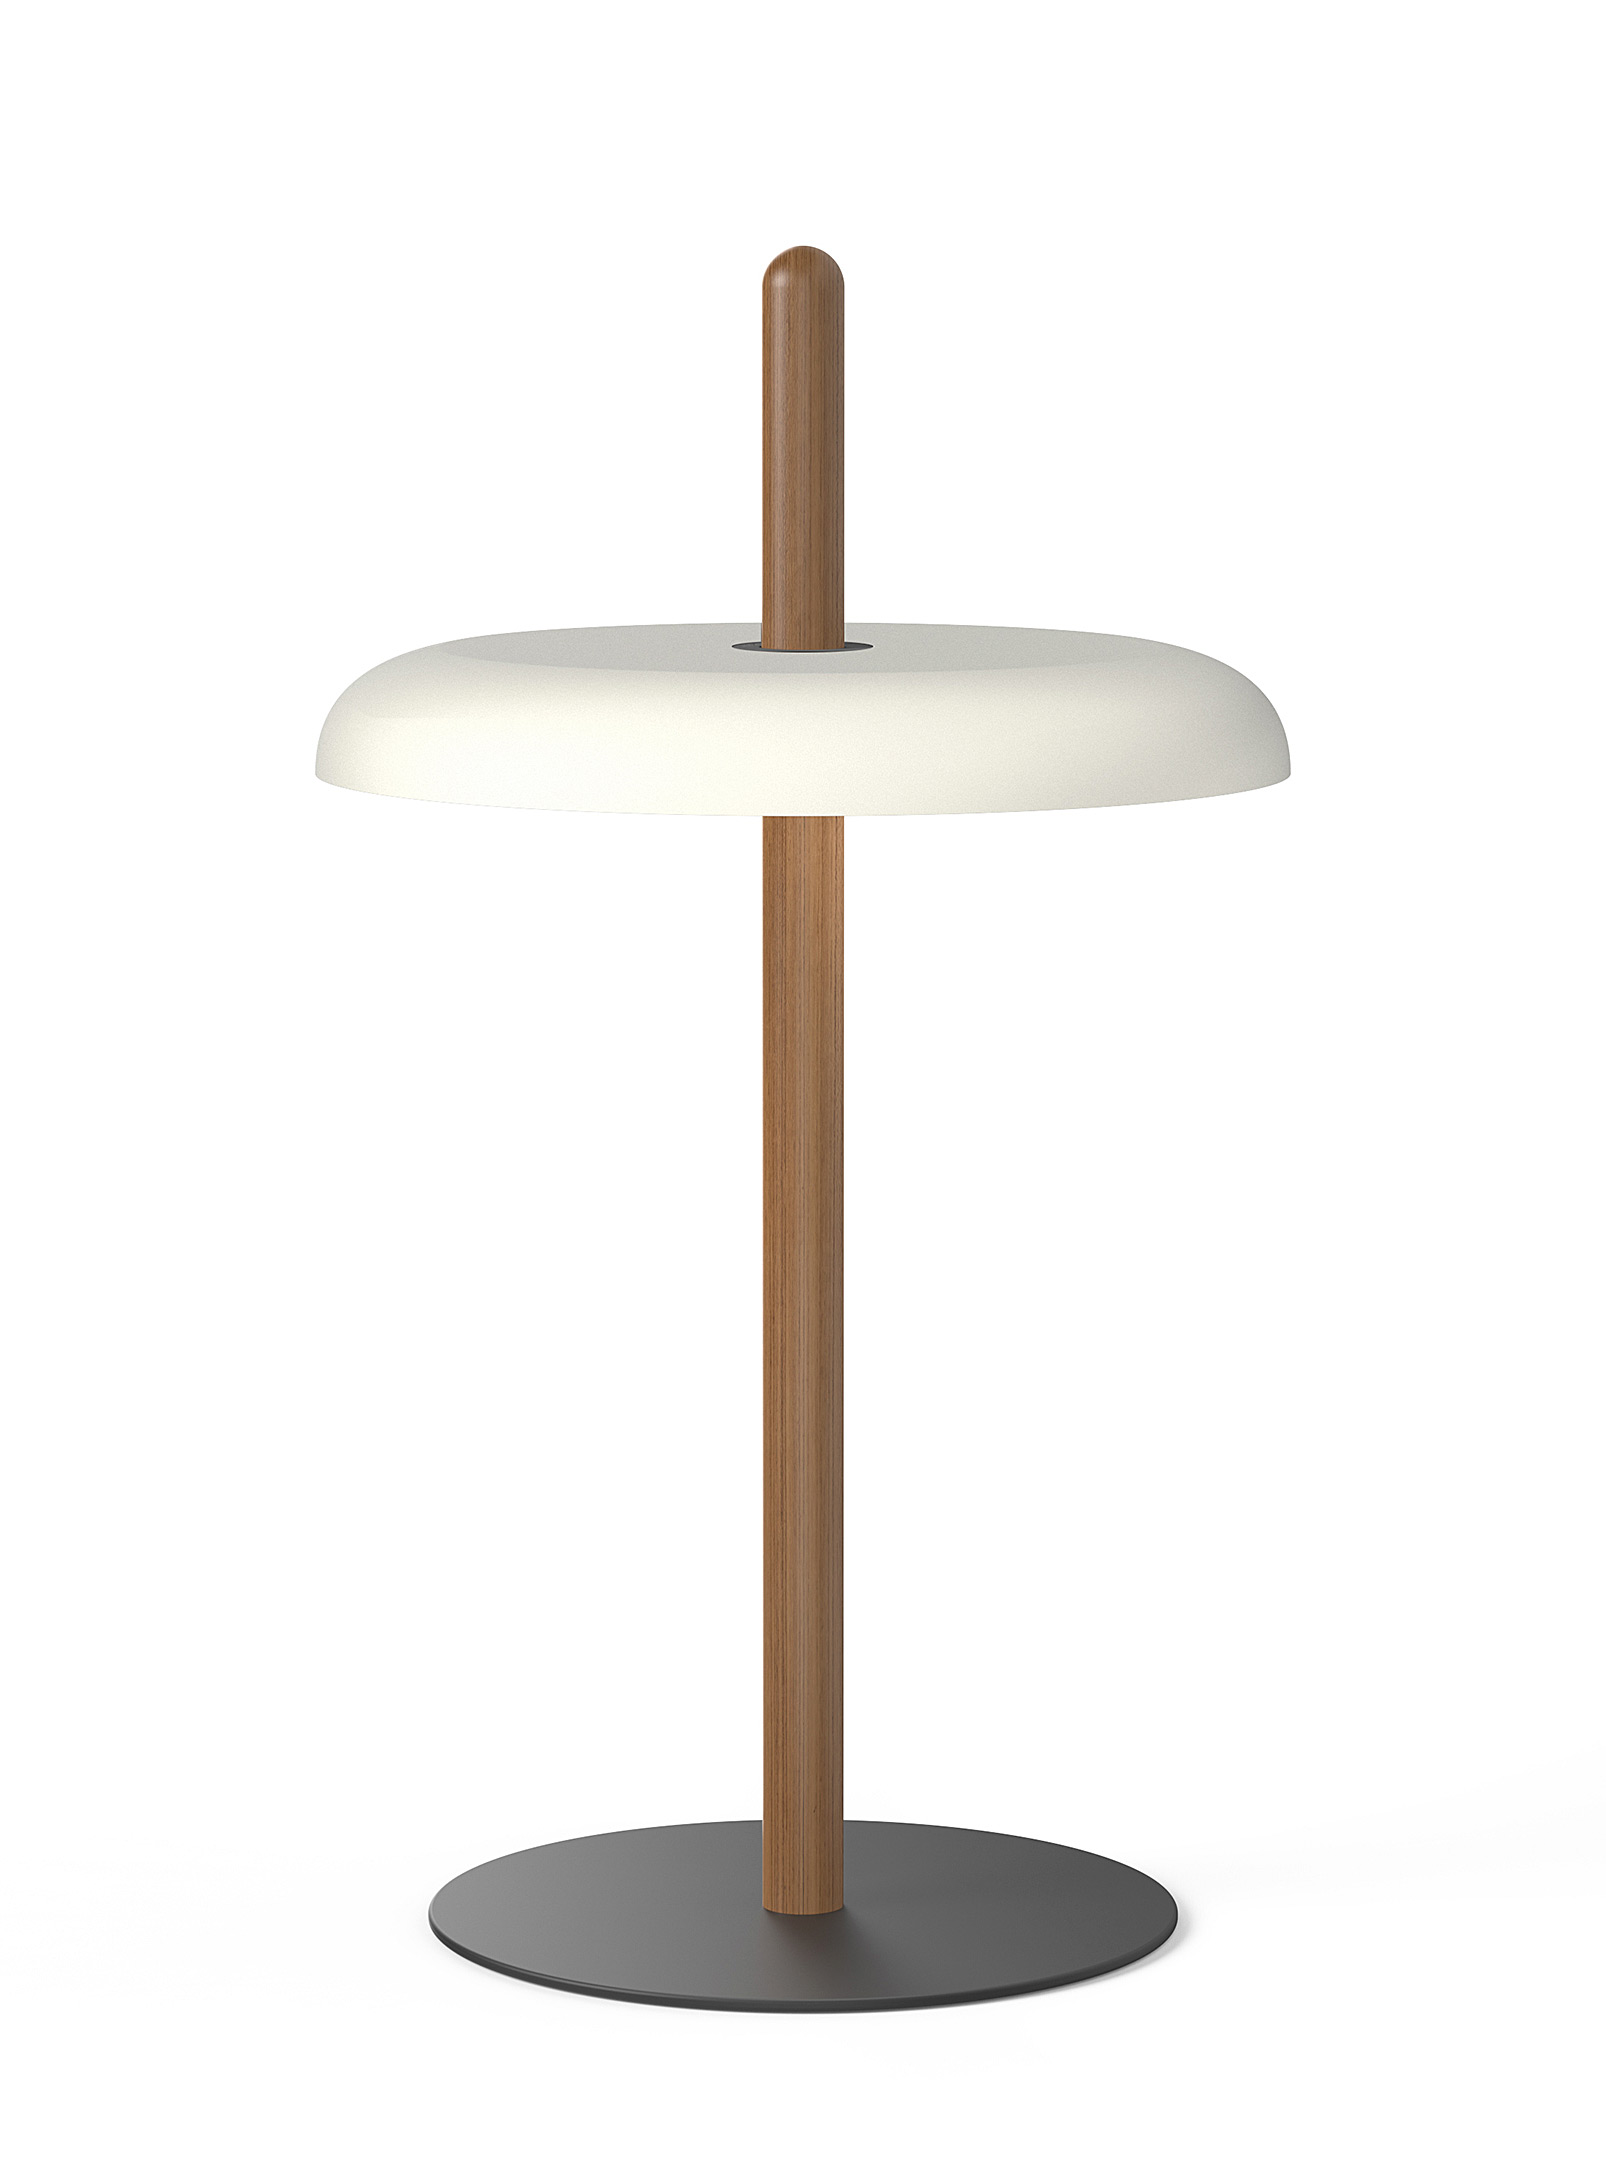 Pablo Designs Nivél Table Lamp With Solid Walnut Pole In White